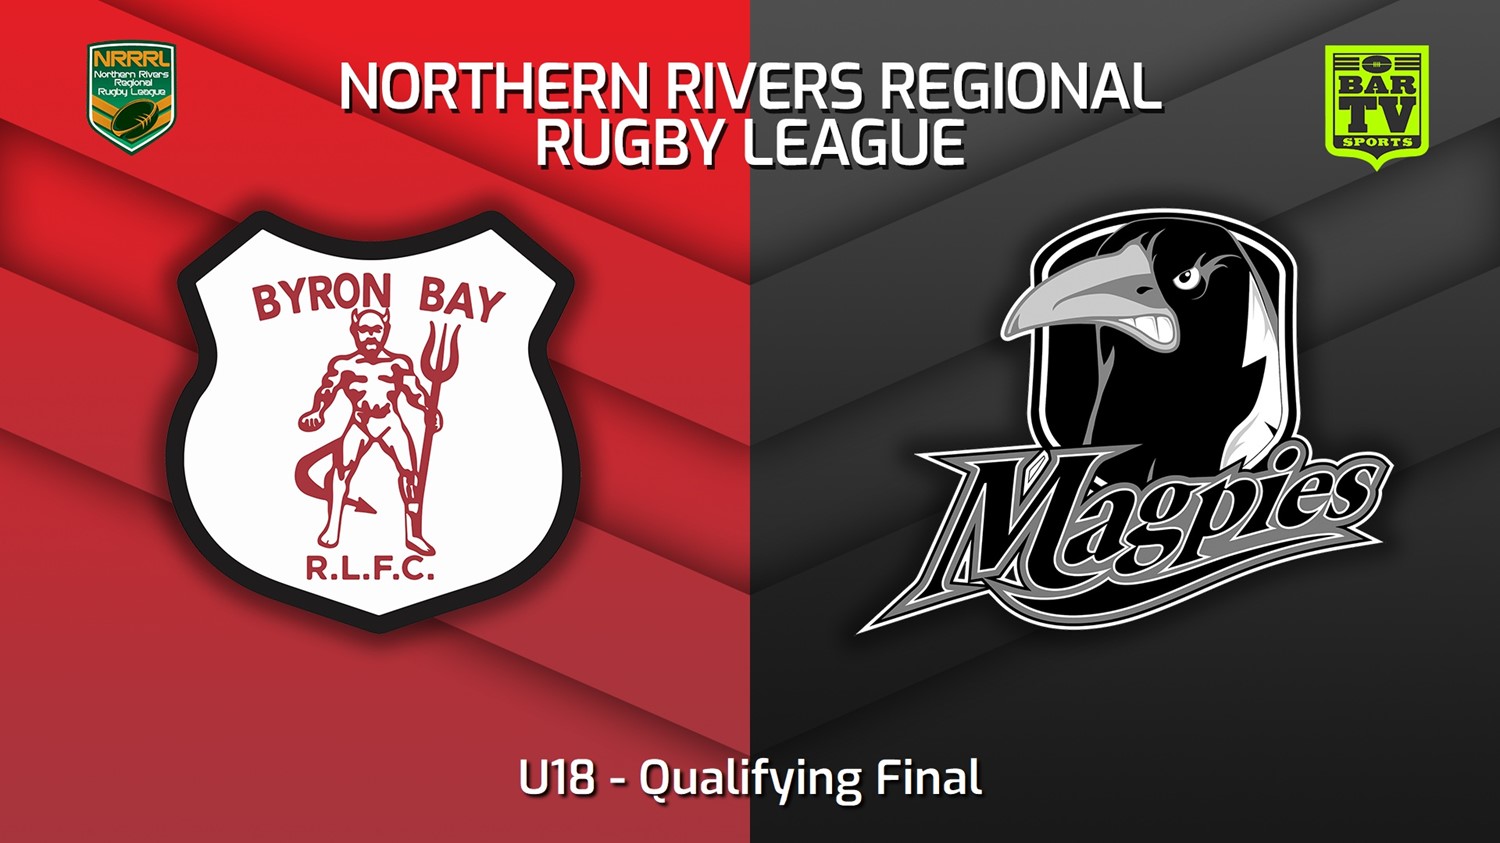 220814-Northern Rivers Qualifying Final - U18 - Byron Bay Red Devils v Lower Clarence Magpies Slate Image